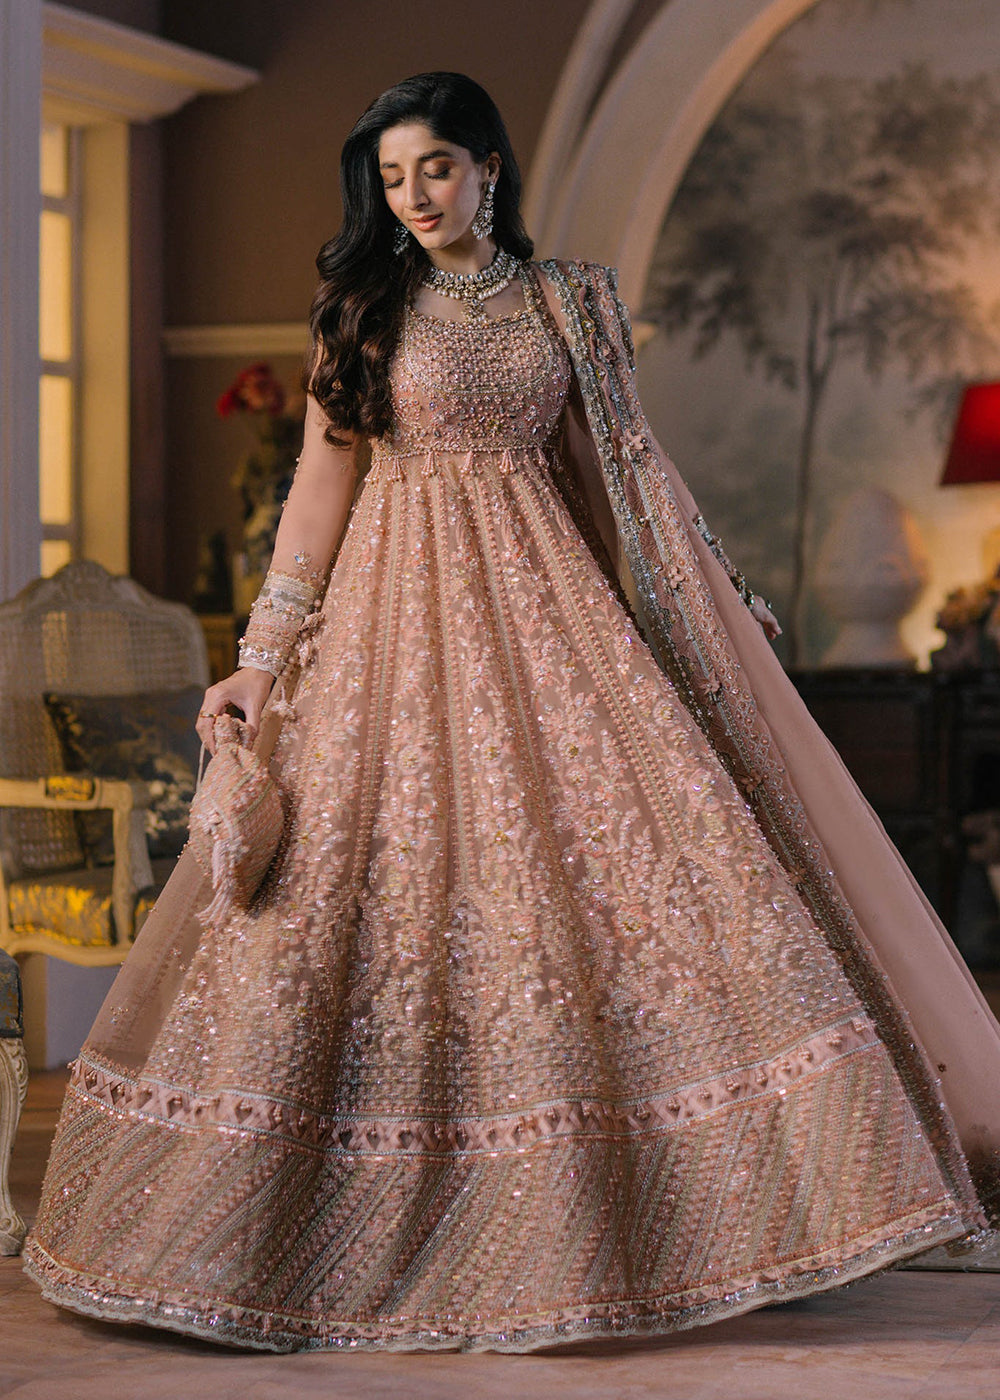 Buy Now Wedding Festive '23 by Elan | ARIANA - EC2-23-07 Online at Empress Online in USA, UK, Canada & Worldwide at Empress Clothing.